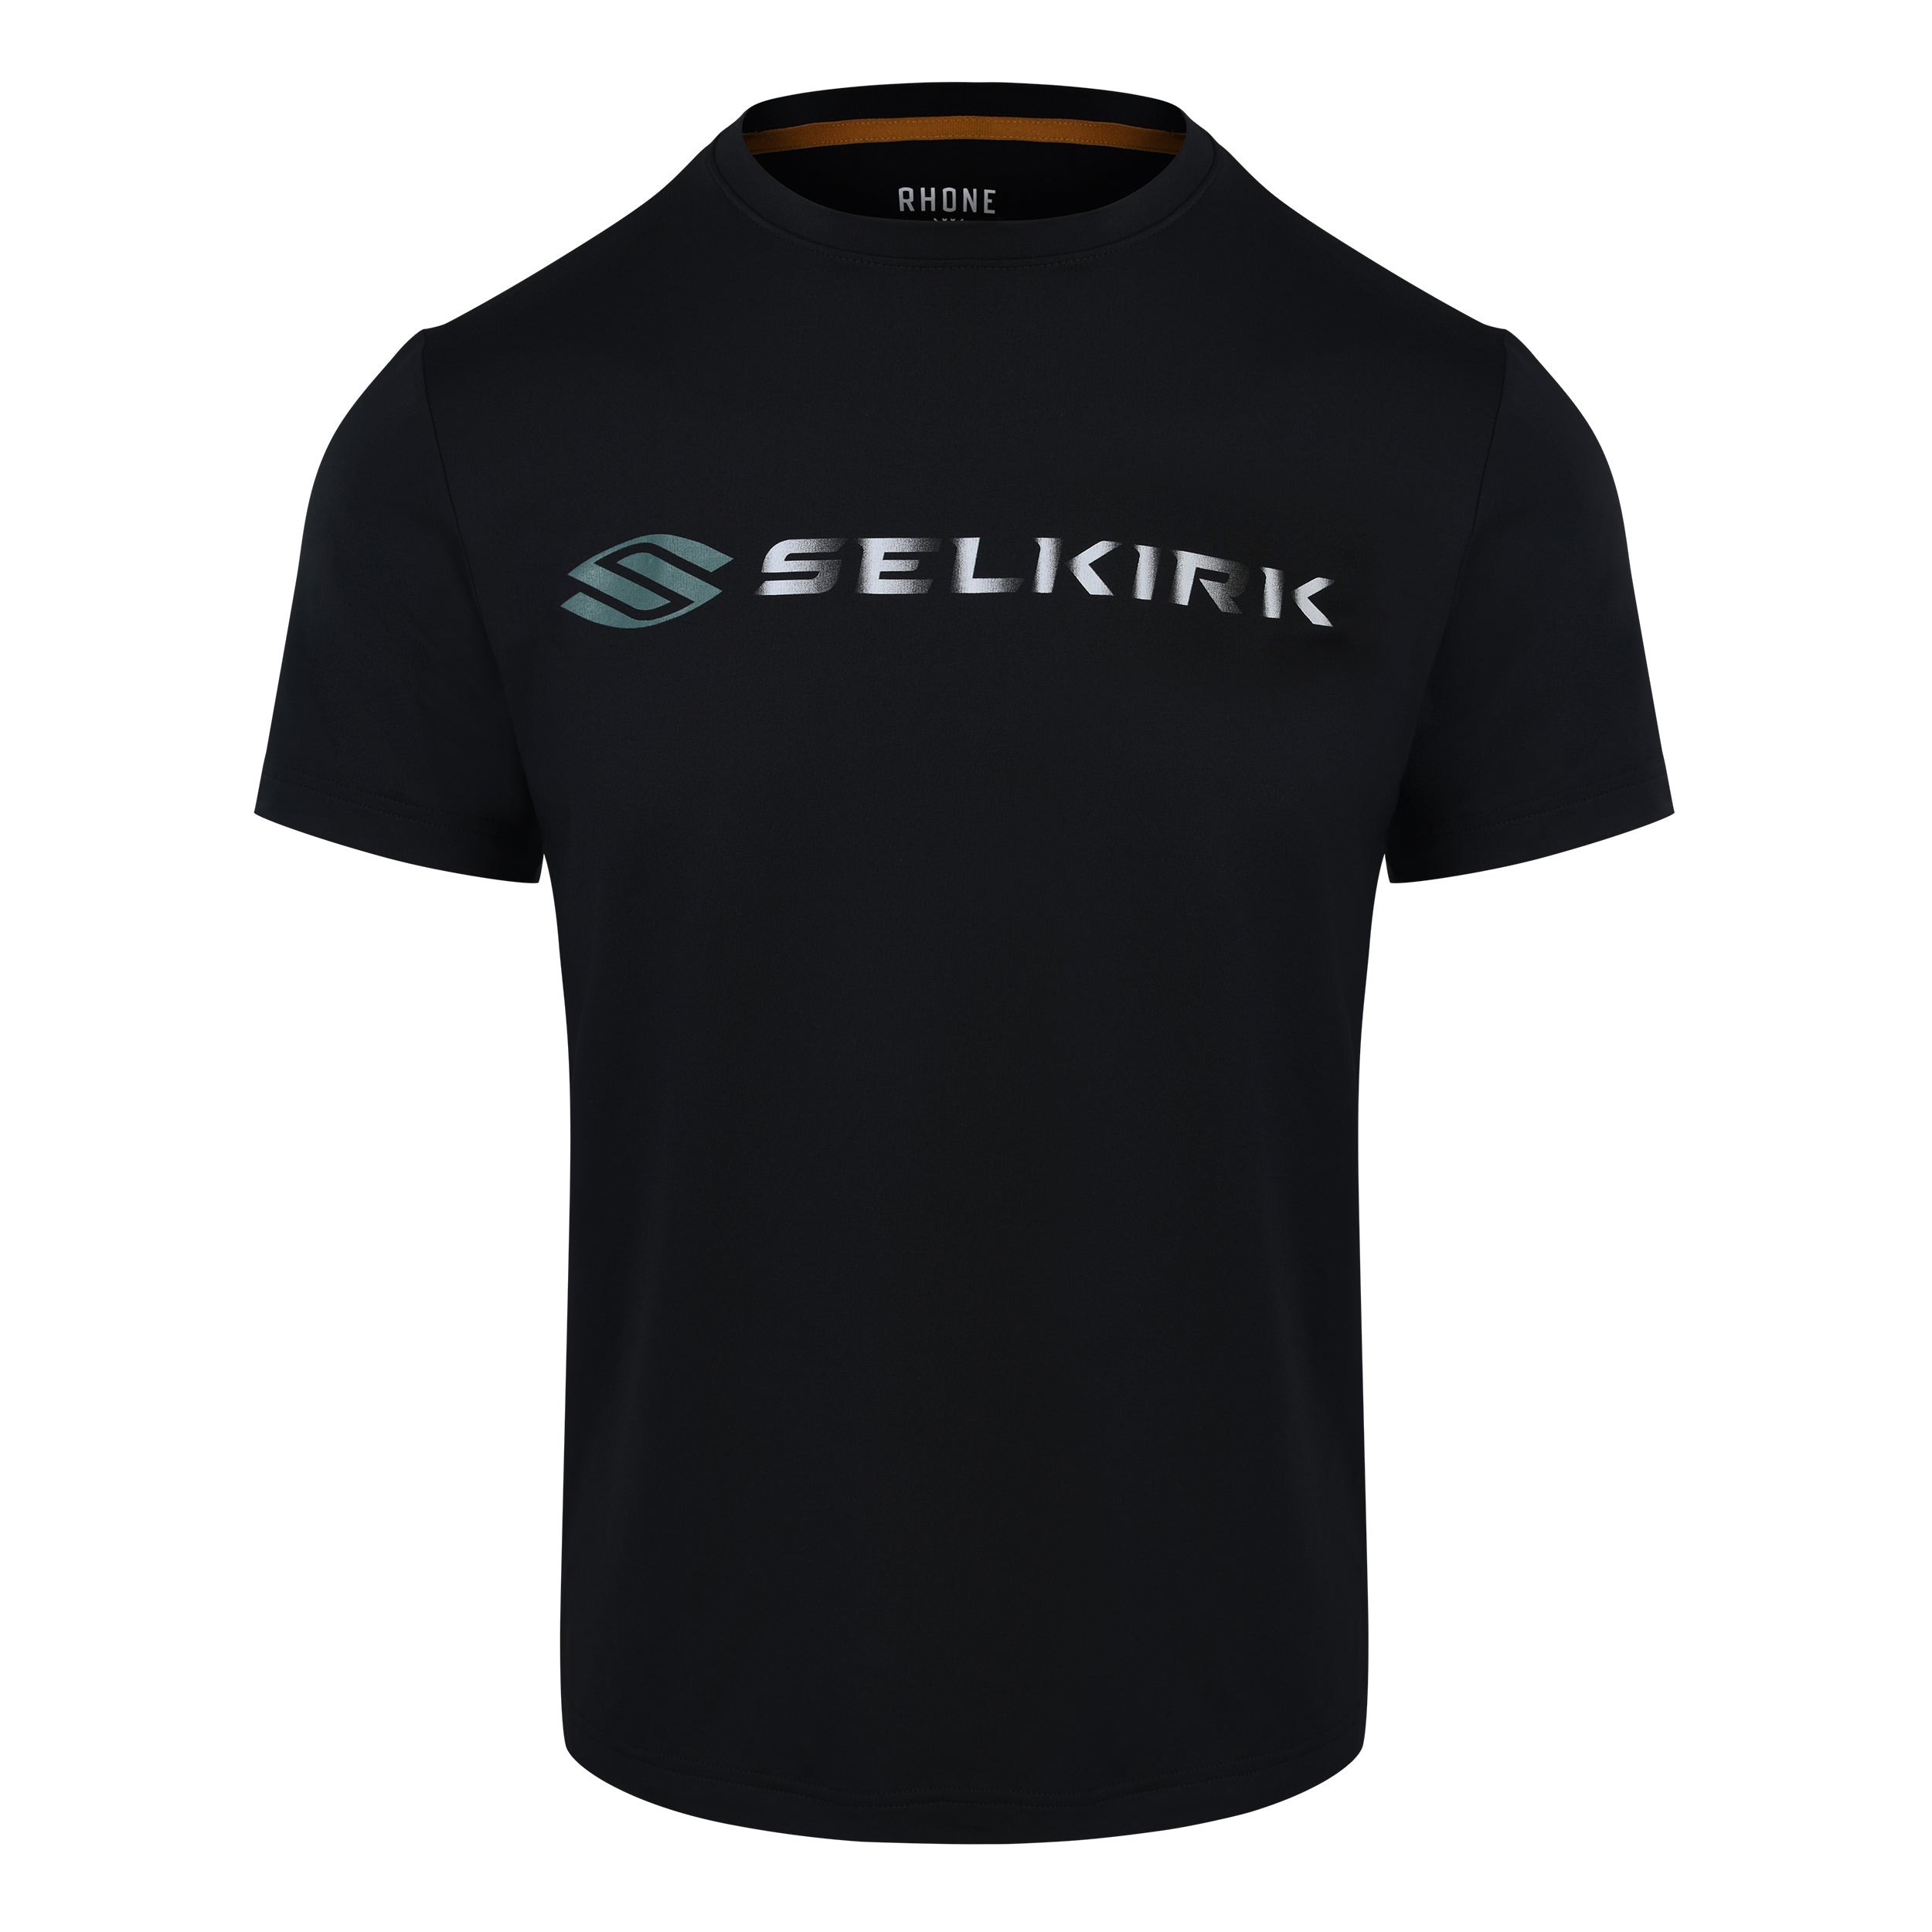 The Selkirk x Rhone Men’s Backspin Tee for pickleball players in black, white, and blue. With all-way stretch performance fabric that keeps you comfortable and dry during your most intense pickleball matches.